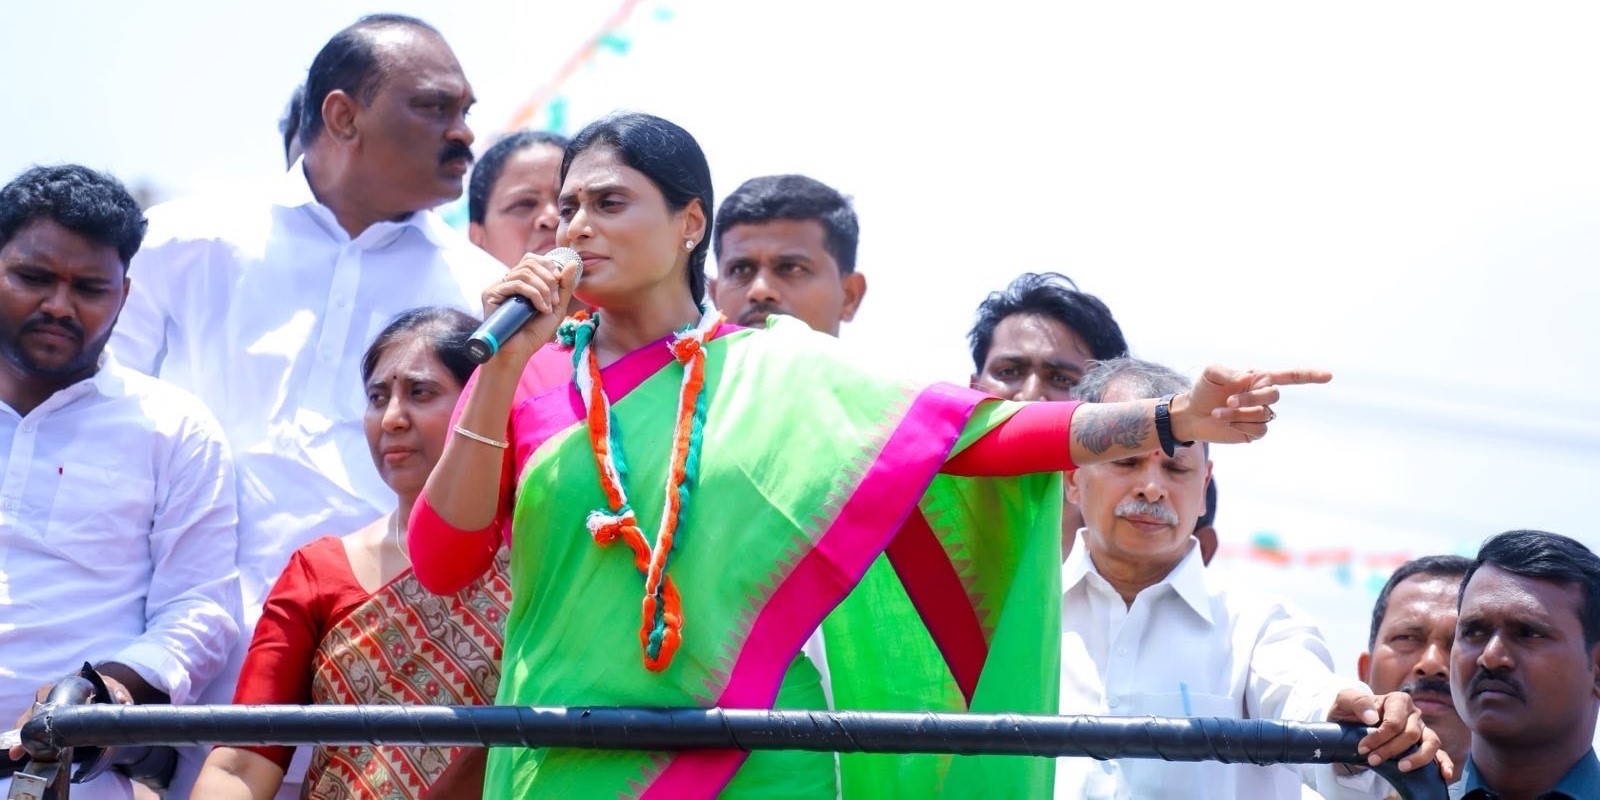 YS Sharmila speaking during a poll rally. (X)